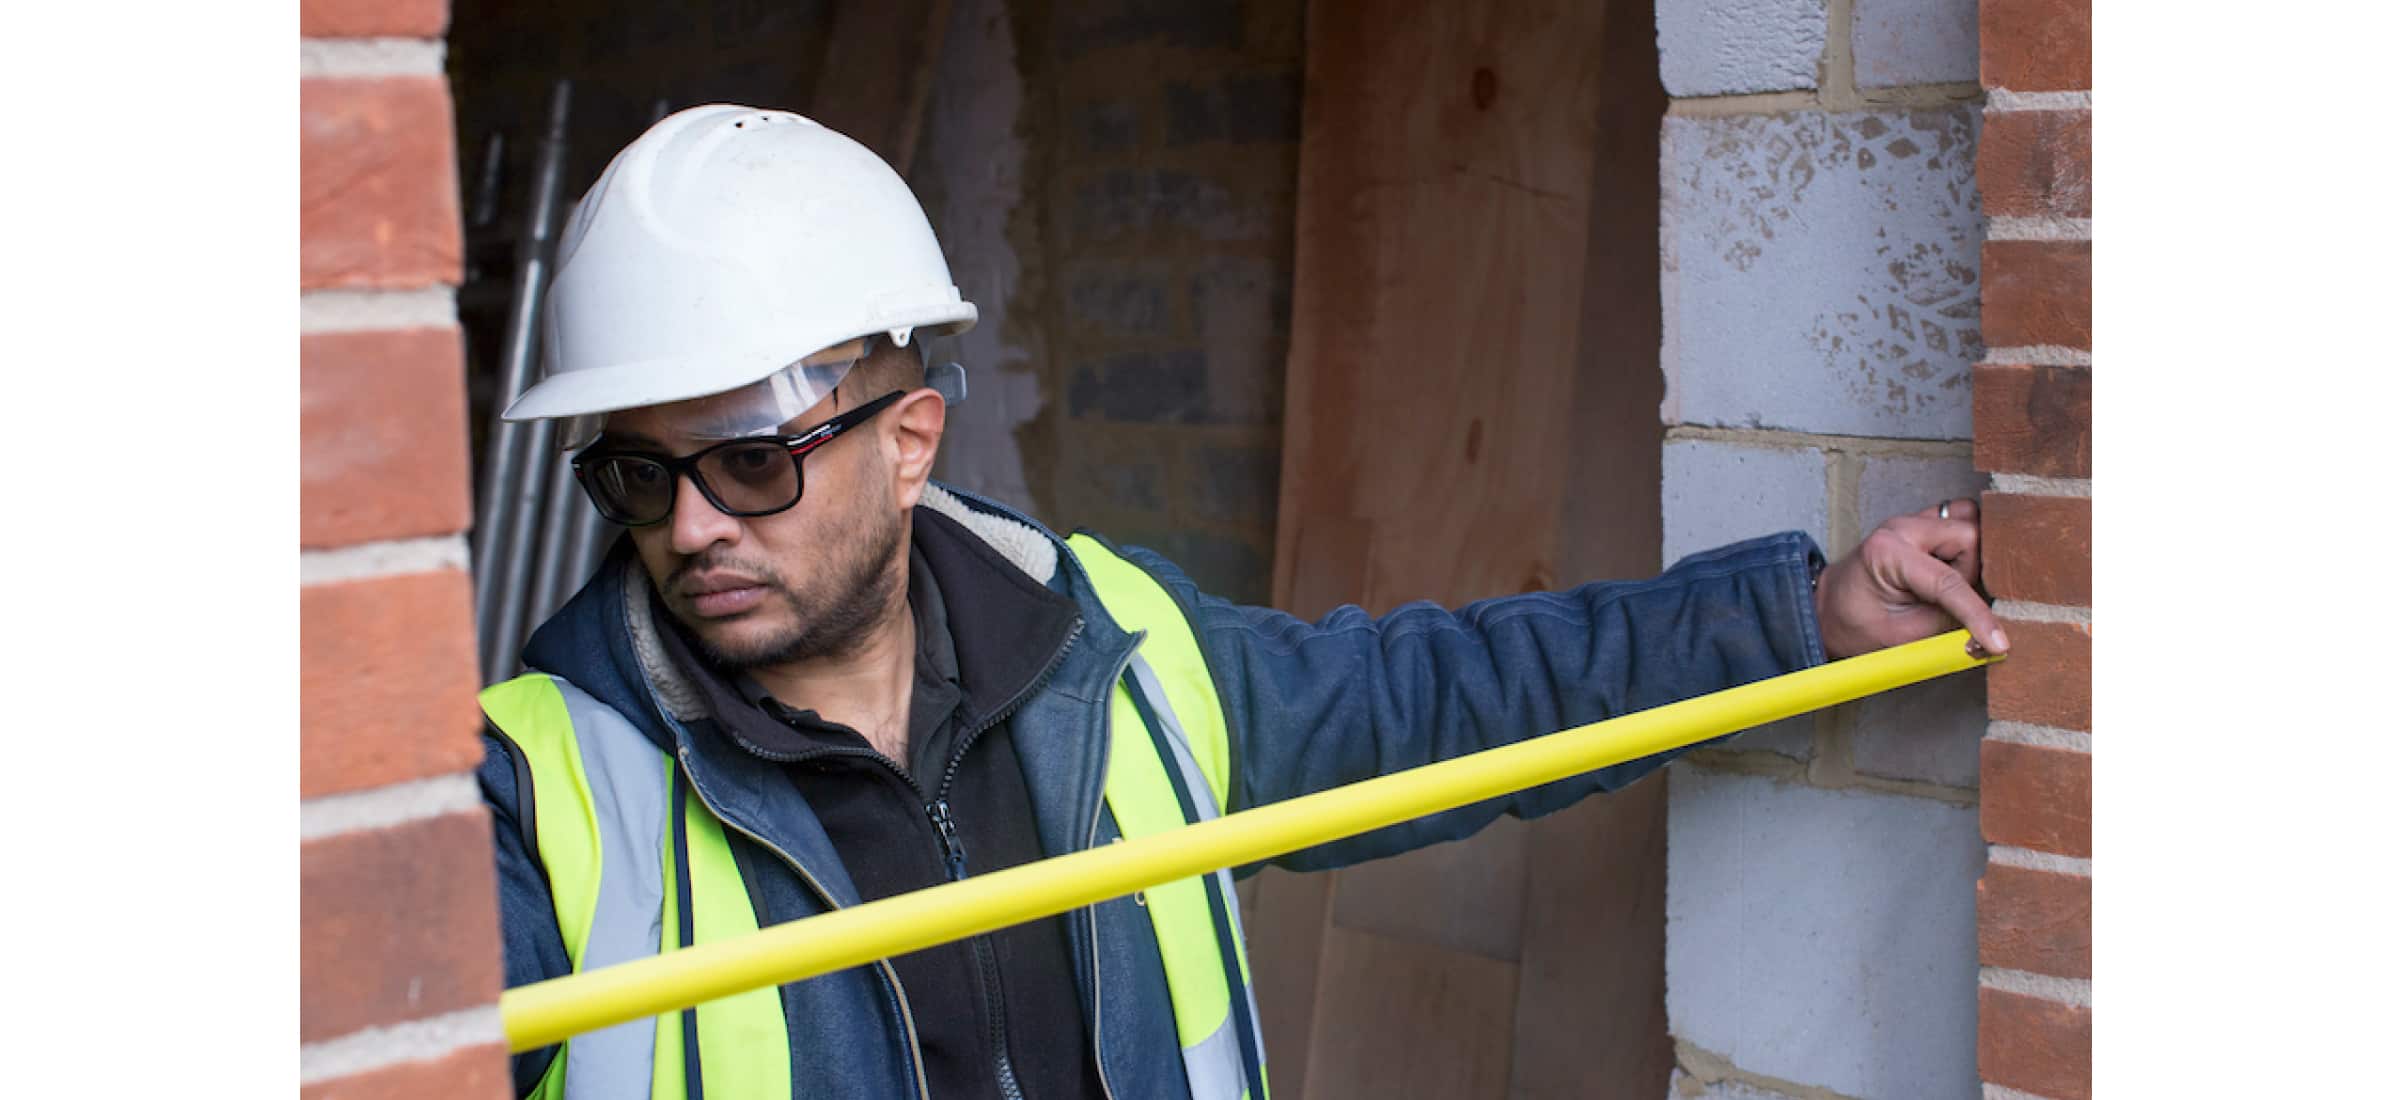 Hitesh at a construction site wearing a safety hat, measuring a doorway with a measuring tape.